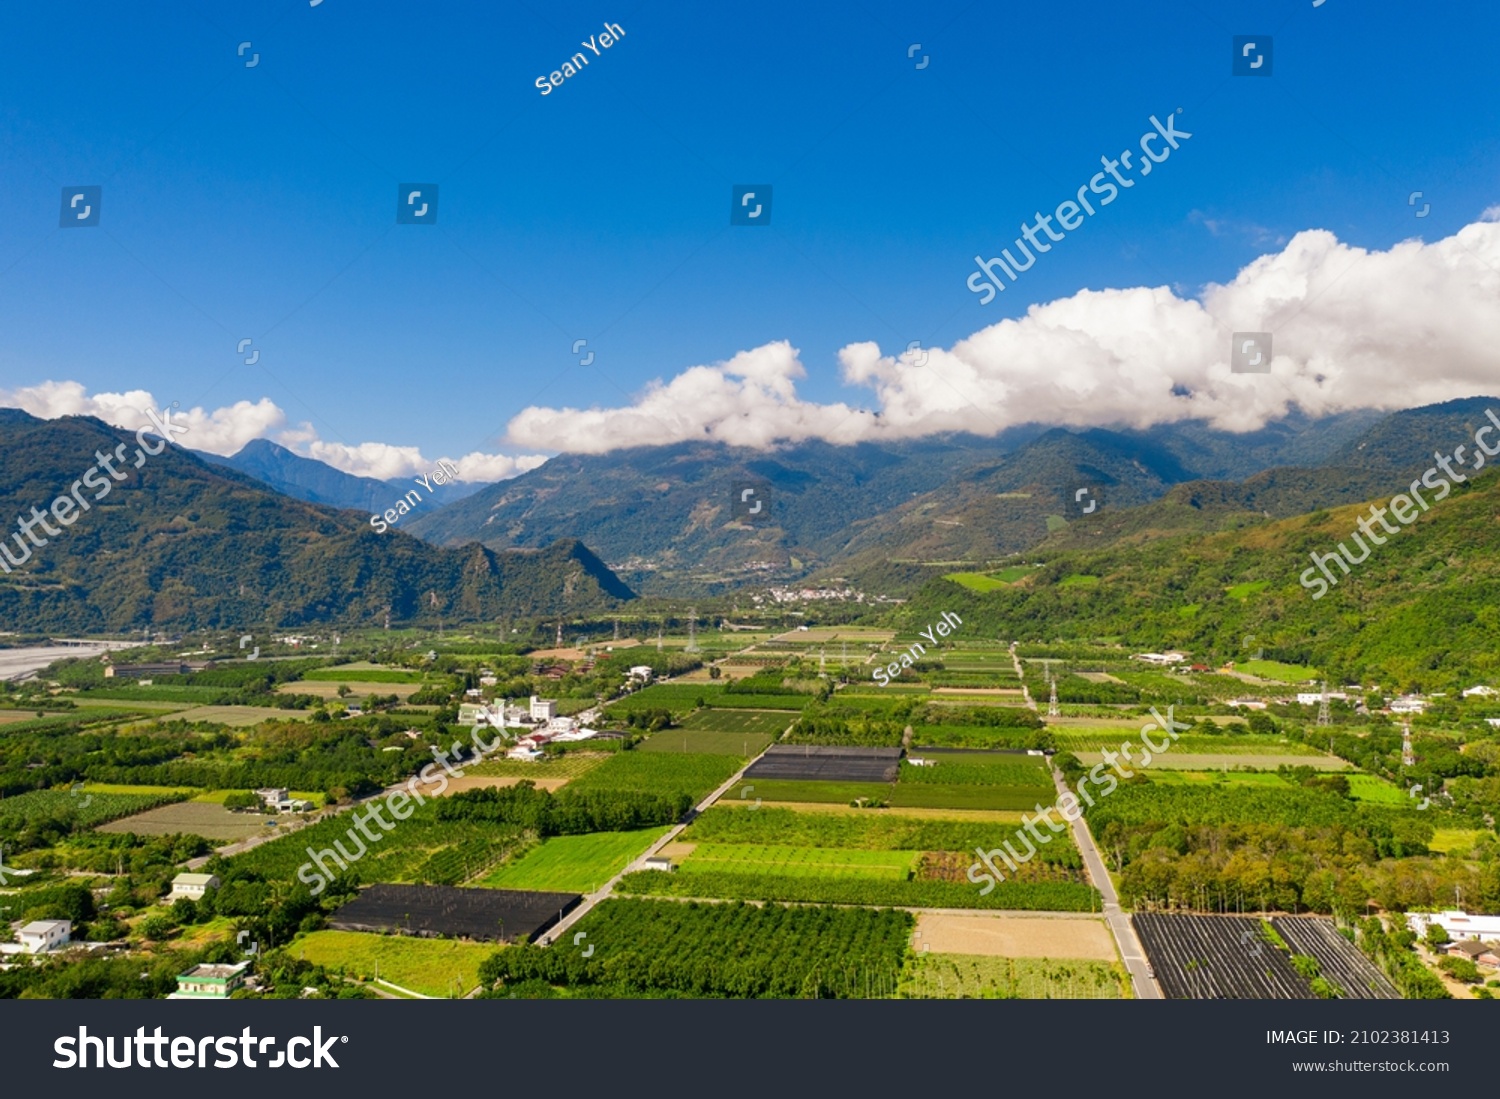 Aerial of square, green green paddy, trees and mountain with blue sky and cloud under sunny day in Longtian Village, Luye township, Taitung. A famous country with Checkerboard street, Japanese shrine. #2102381413